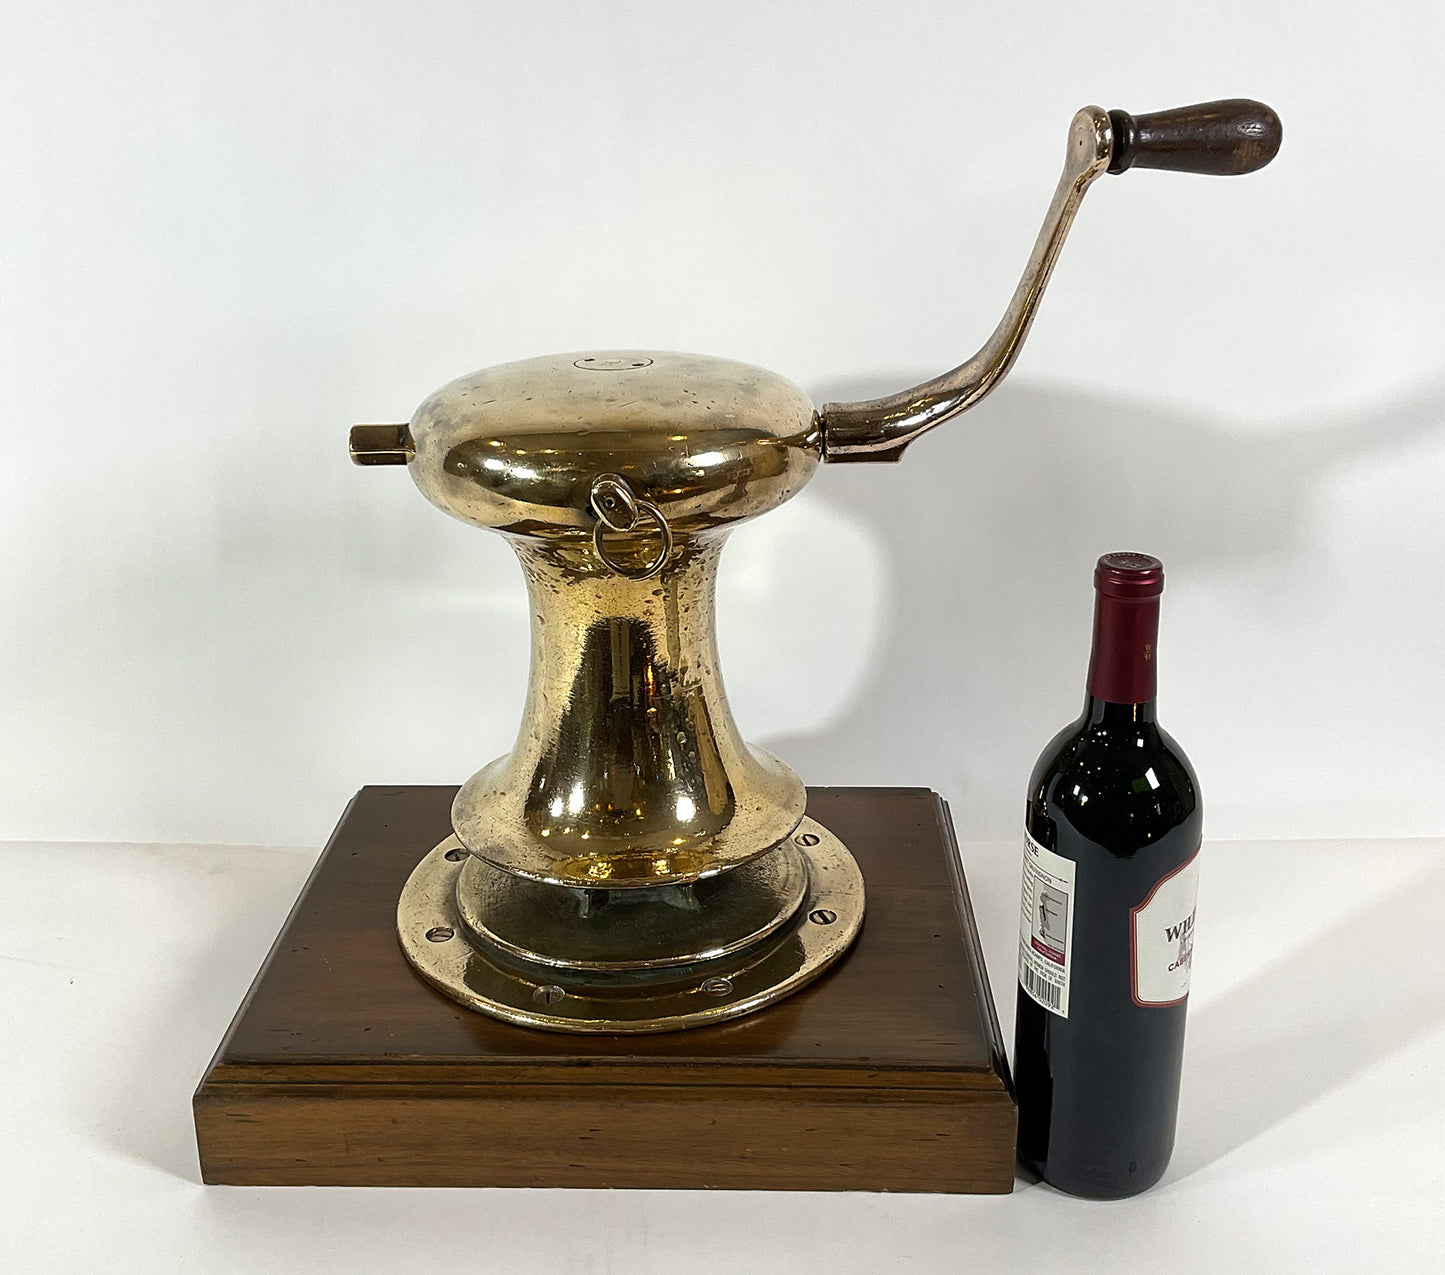 Polished Brass Yacht Capstan By Hereshoff - Lannan Gallery